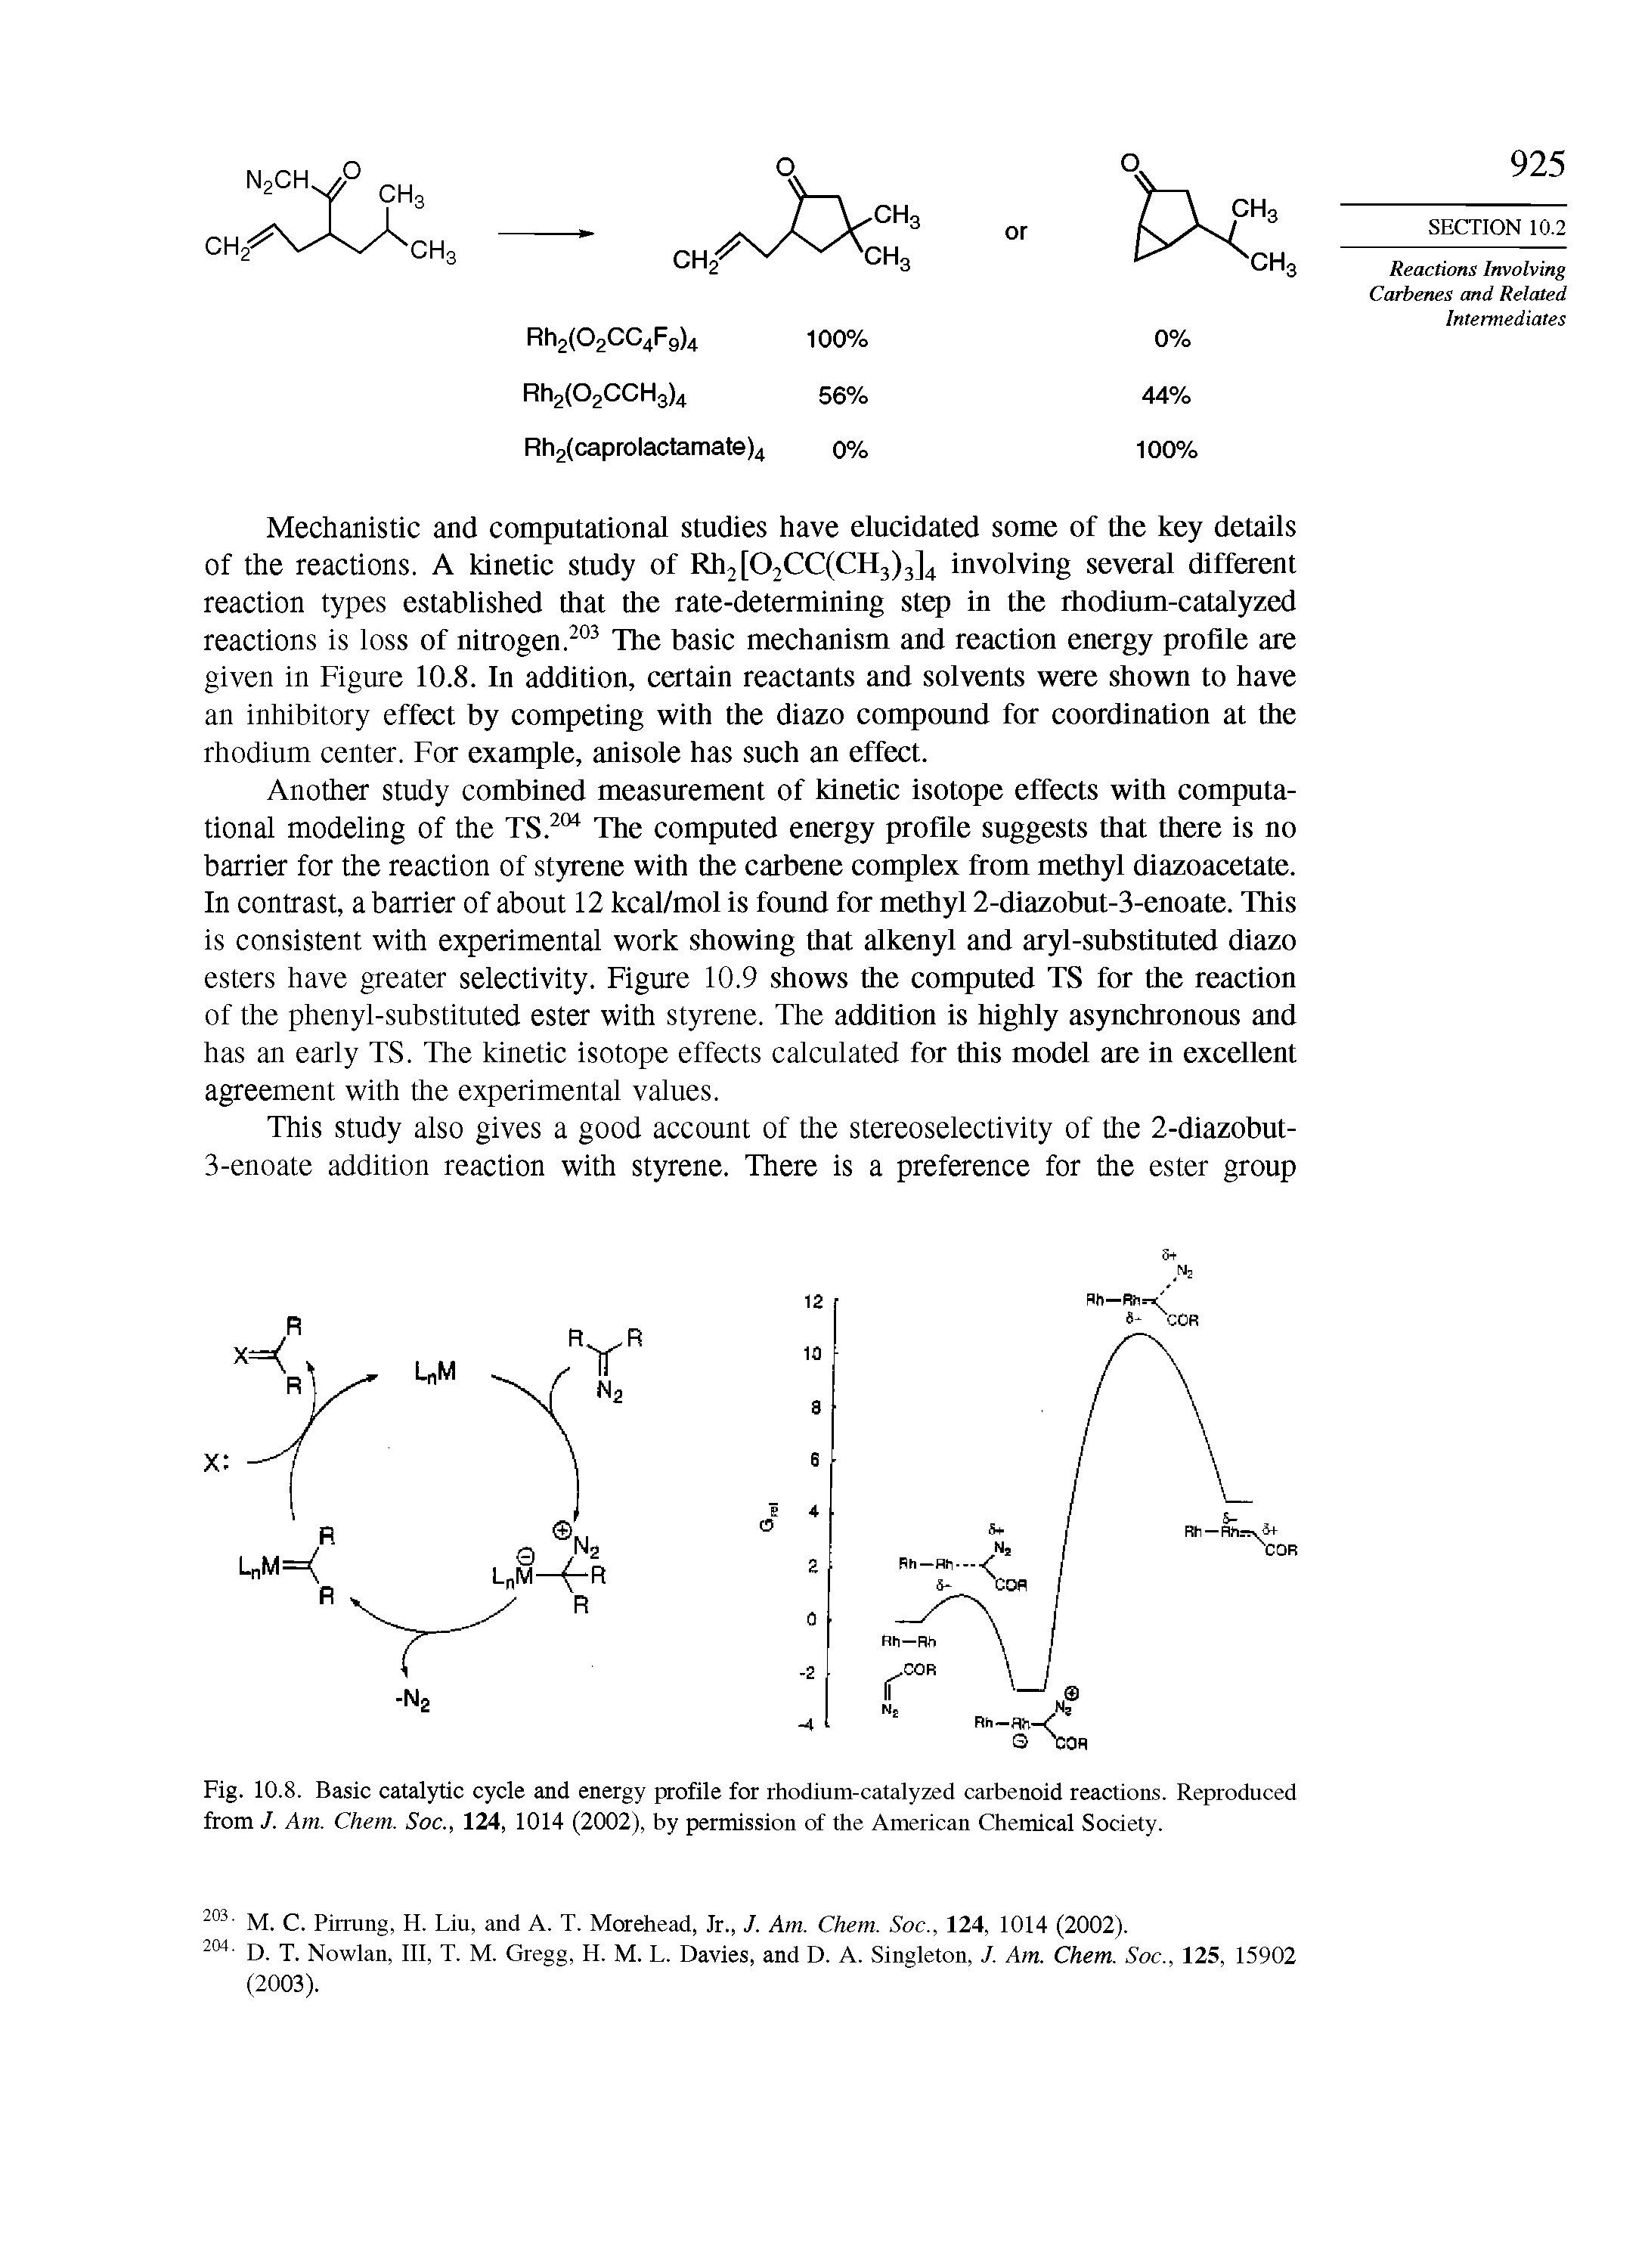 Fig. 10.8. Basic catalytic cycle and energy profile for rhodium-catalyzed carbenoid reactions. Reproduced from J. Am. Chem. Soc., 124, 1014 (2002), by permission of the American Chemical Society.